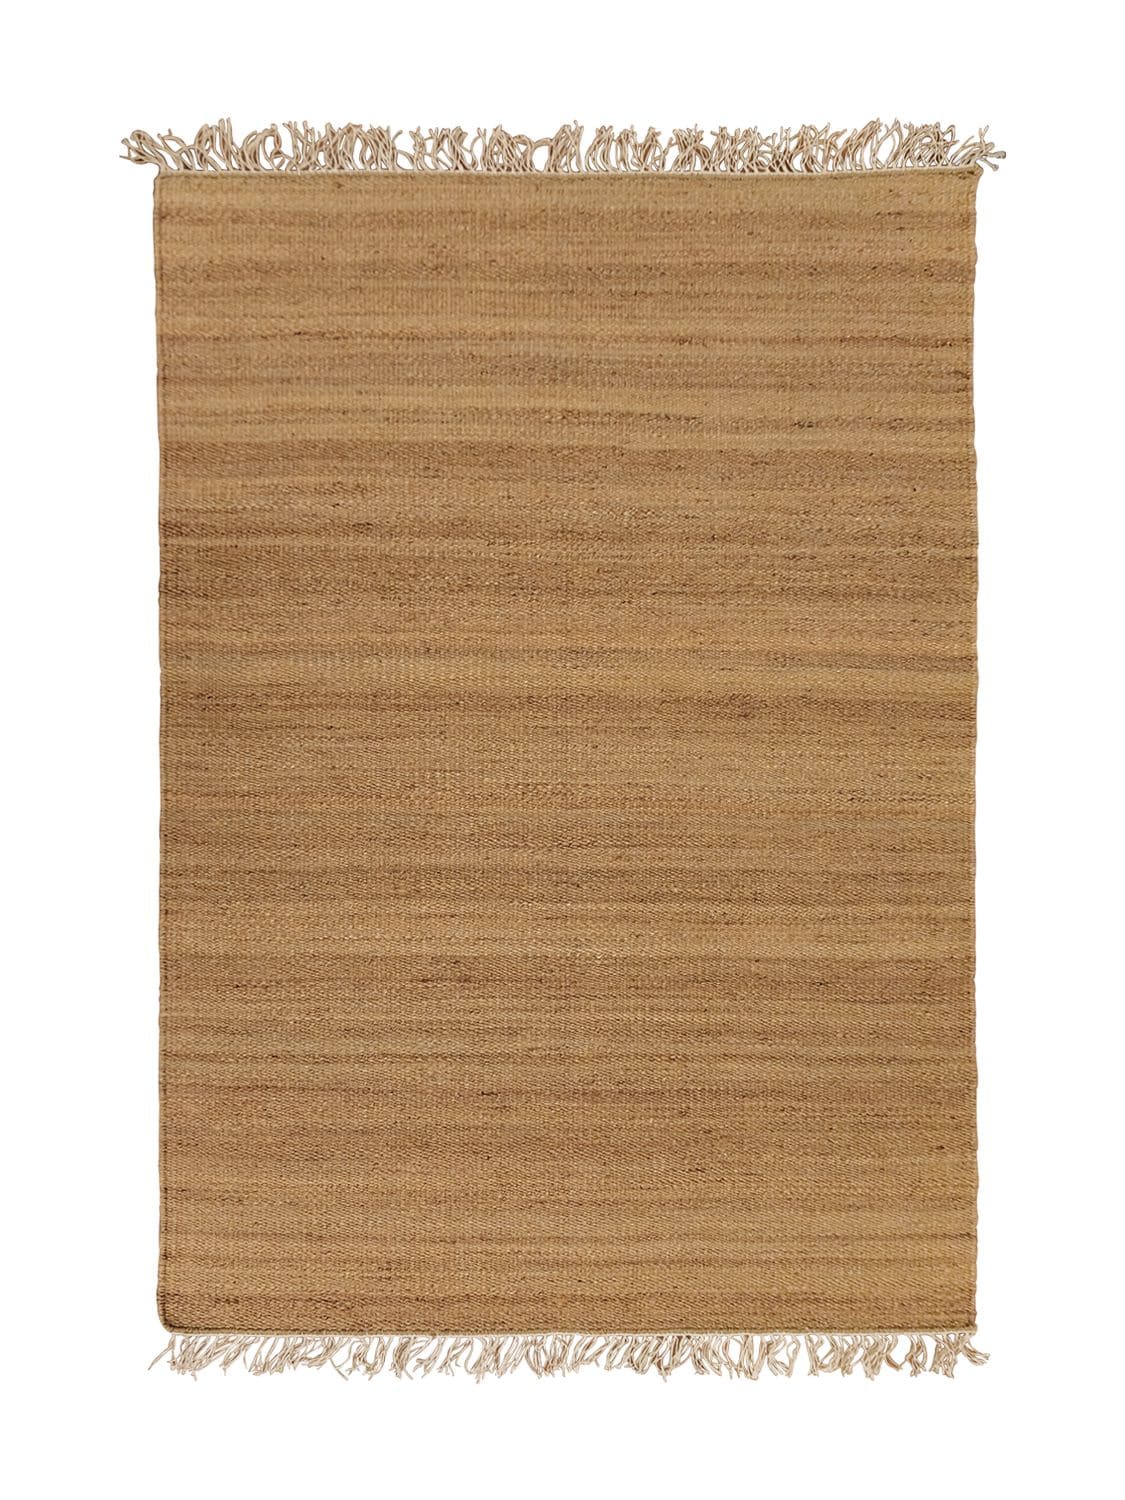 Image of Cocco Handmade Jute Rug With Fringes